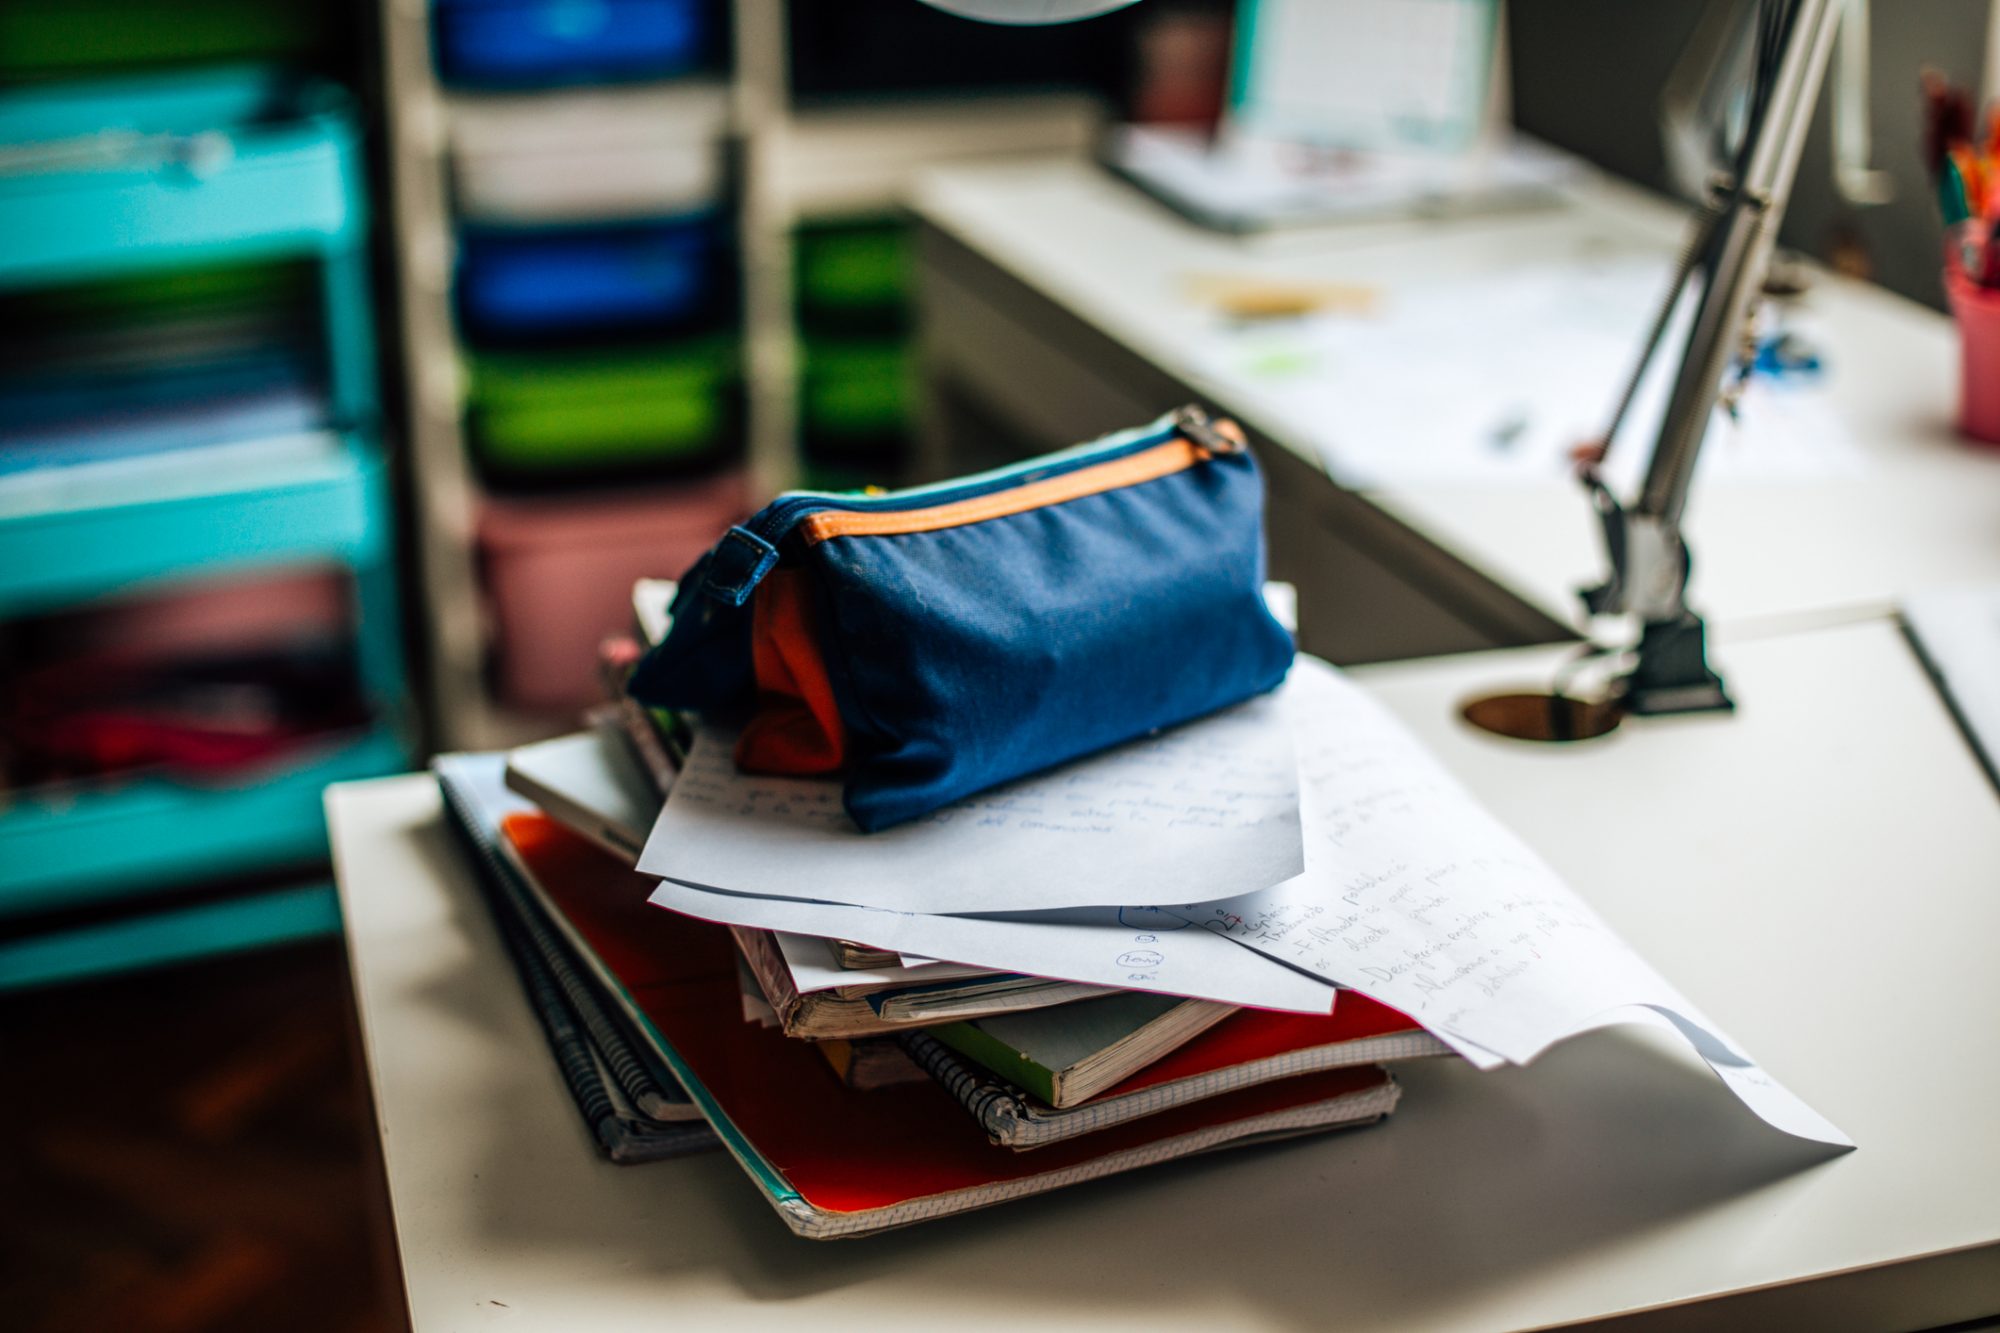 An image of school supplies and notebooks on a desk.